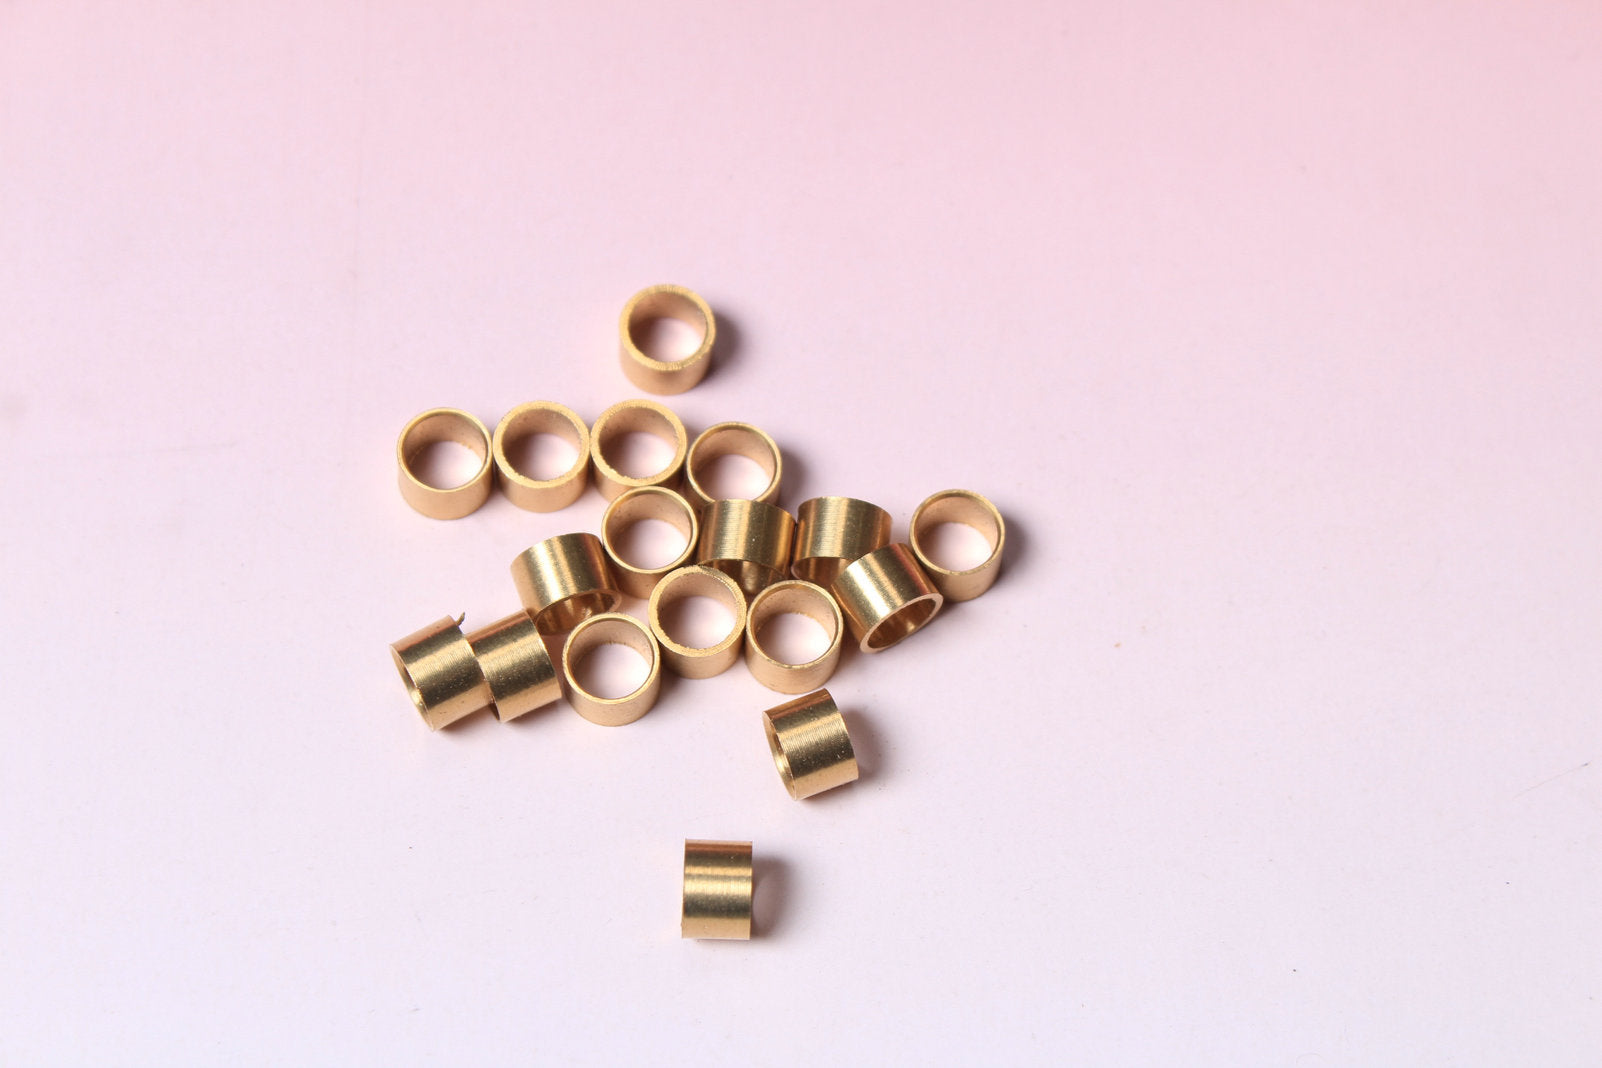 7.5 mm brass ferrules for english 8 ball pool cue ( without thread)